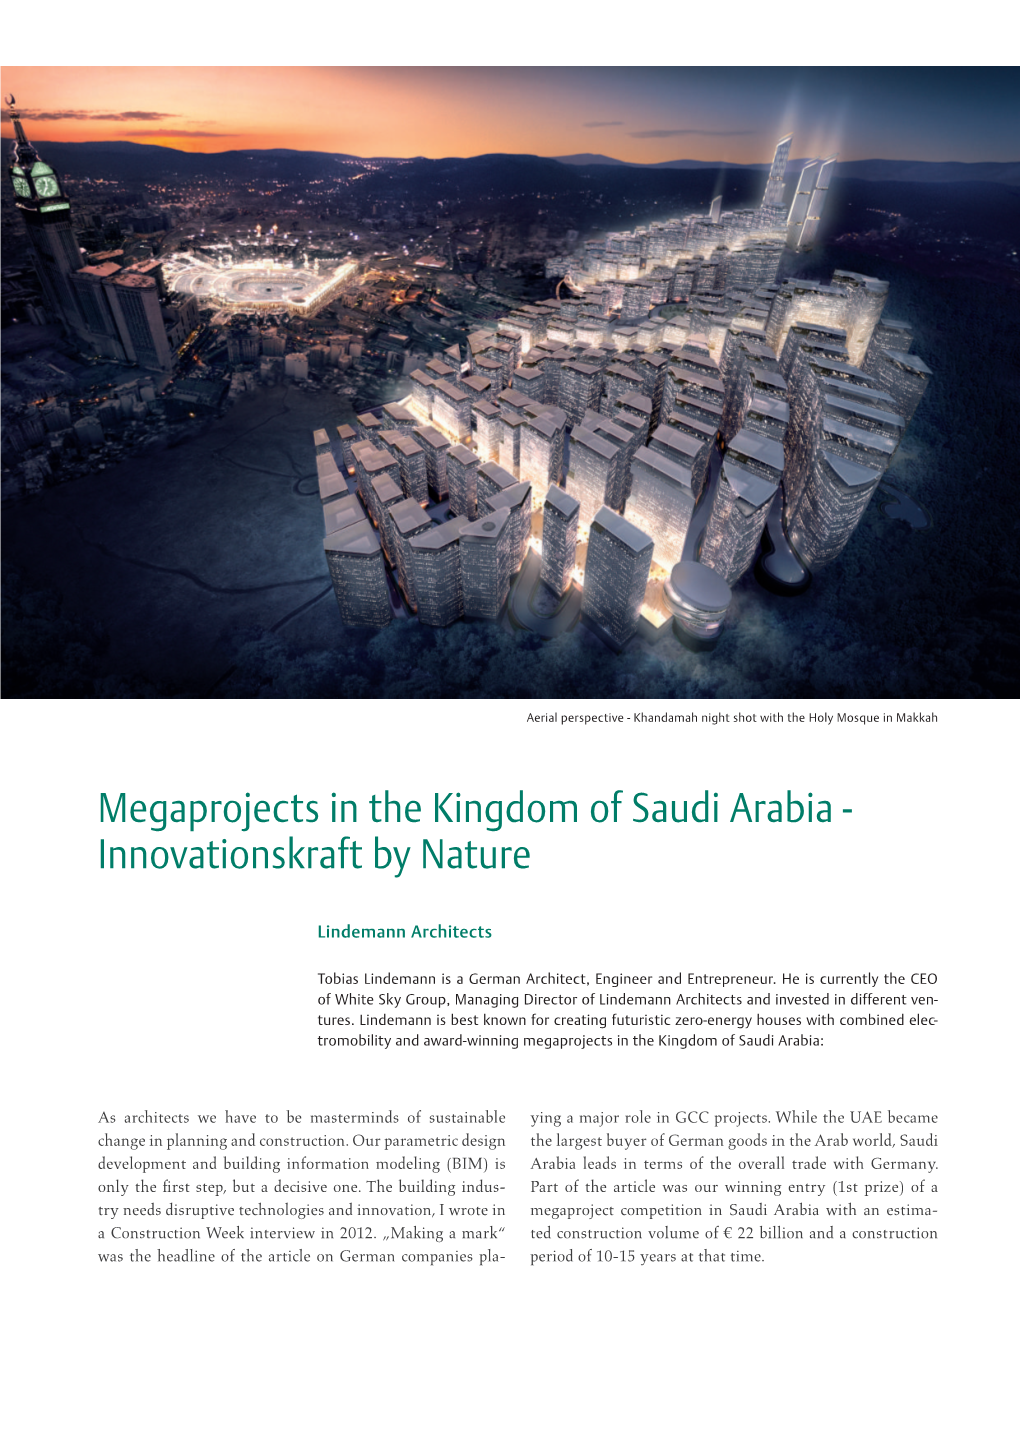 Megaprojects in the Kingdom of Saudi Arabia - Innovationskraft by Nature